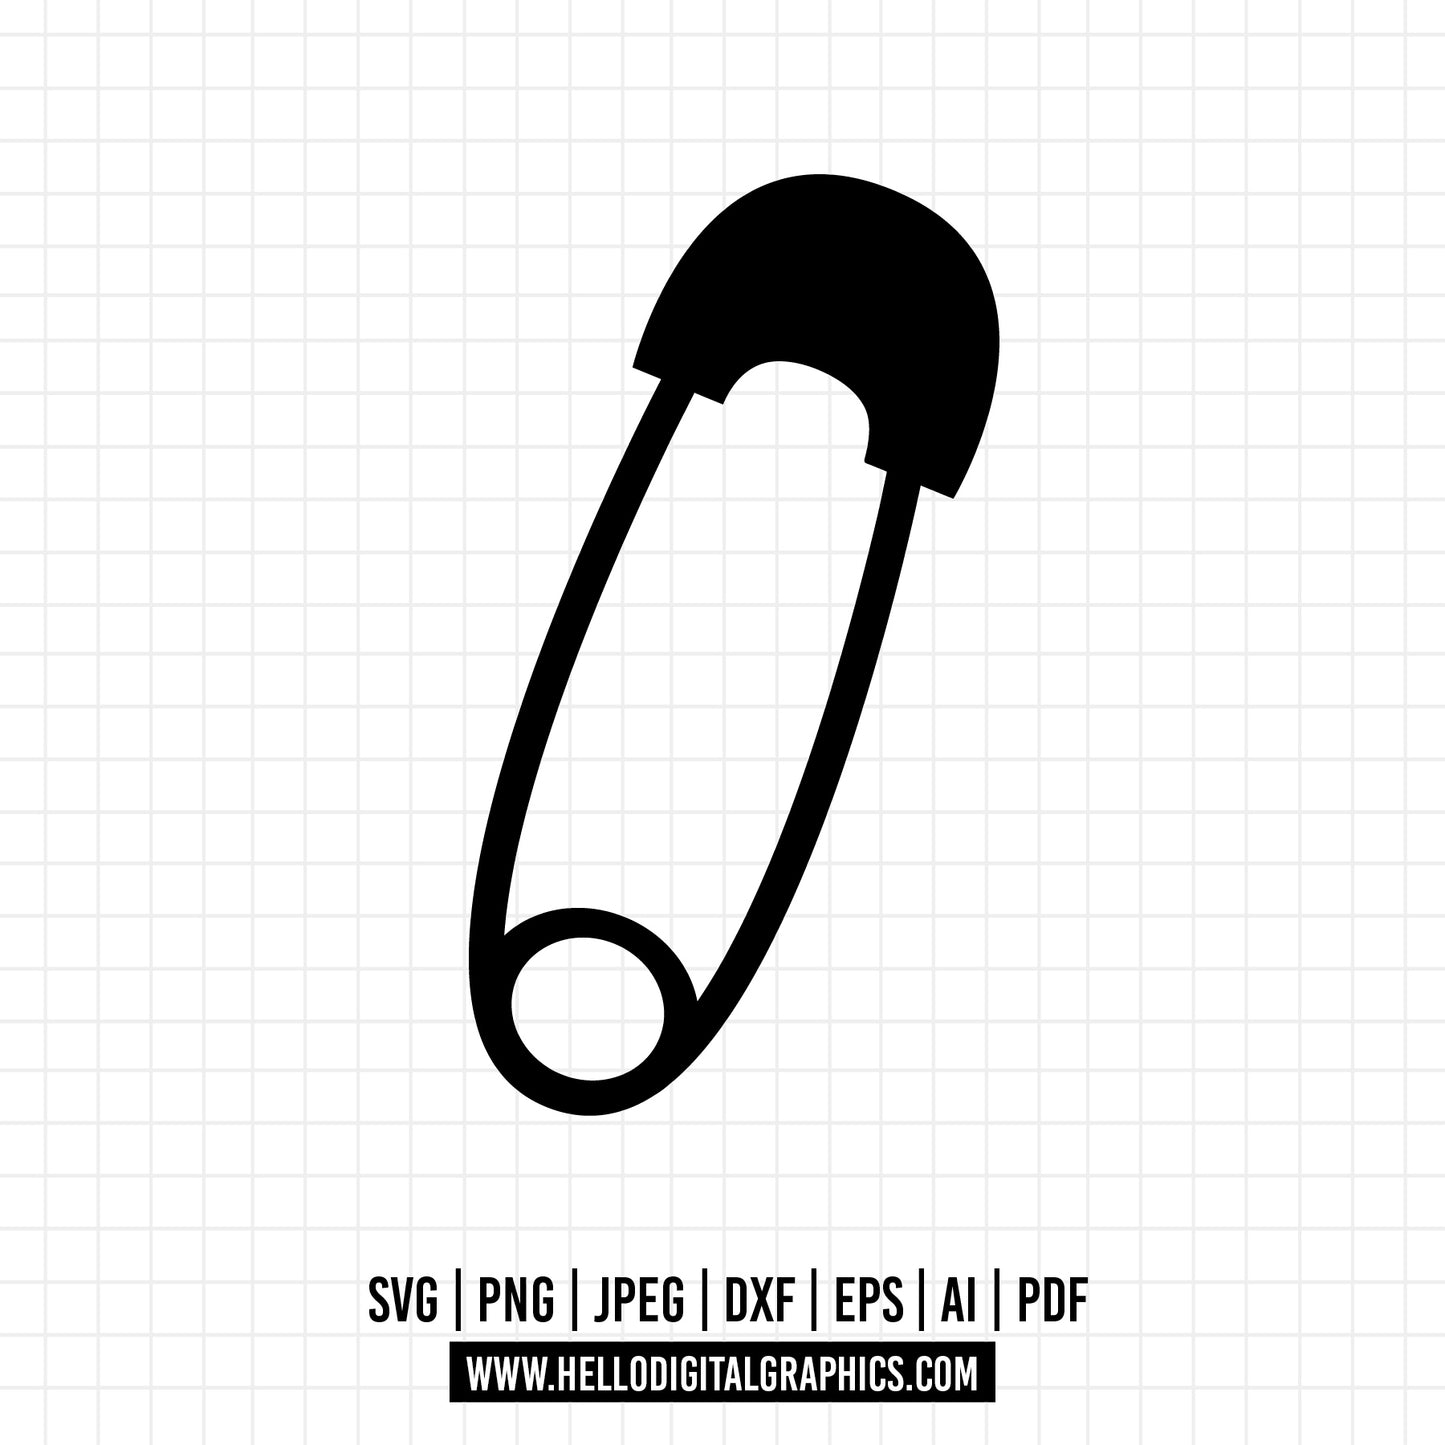 COD822 - Closed Safety Pin, SVG PNG JPG, Bobby Pin, Commercial Use, Instant Download, Baby Pin, Closed Pin, Safety Clip, File for Cricut, Silhouette